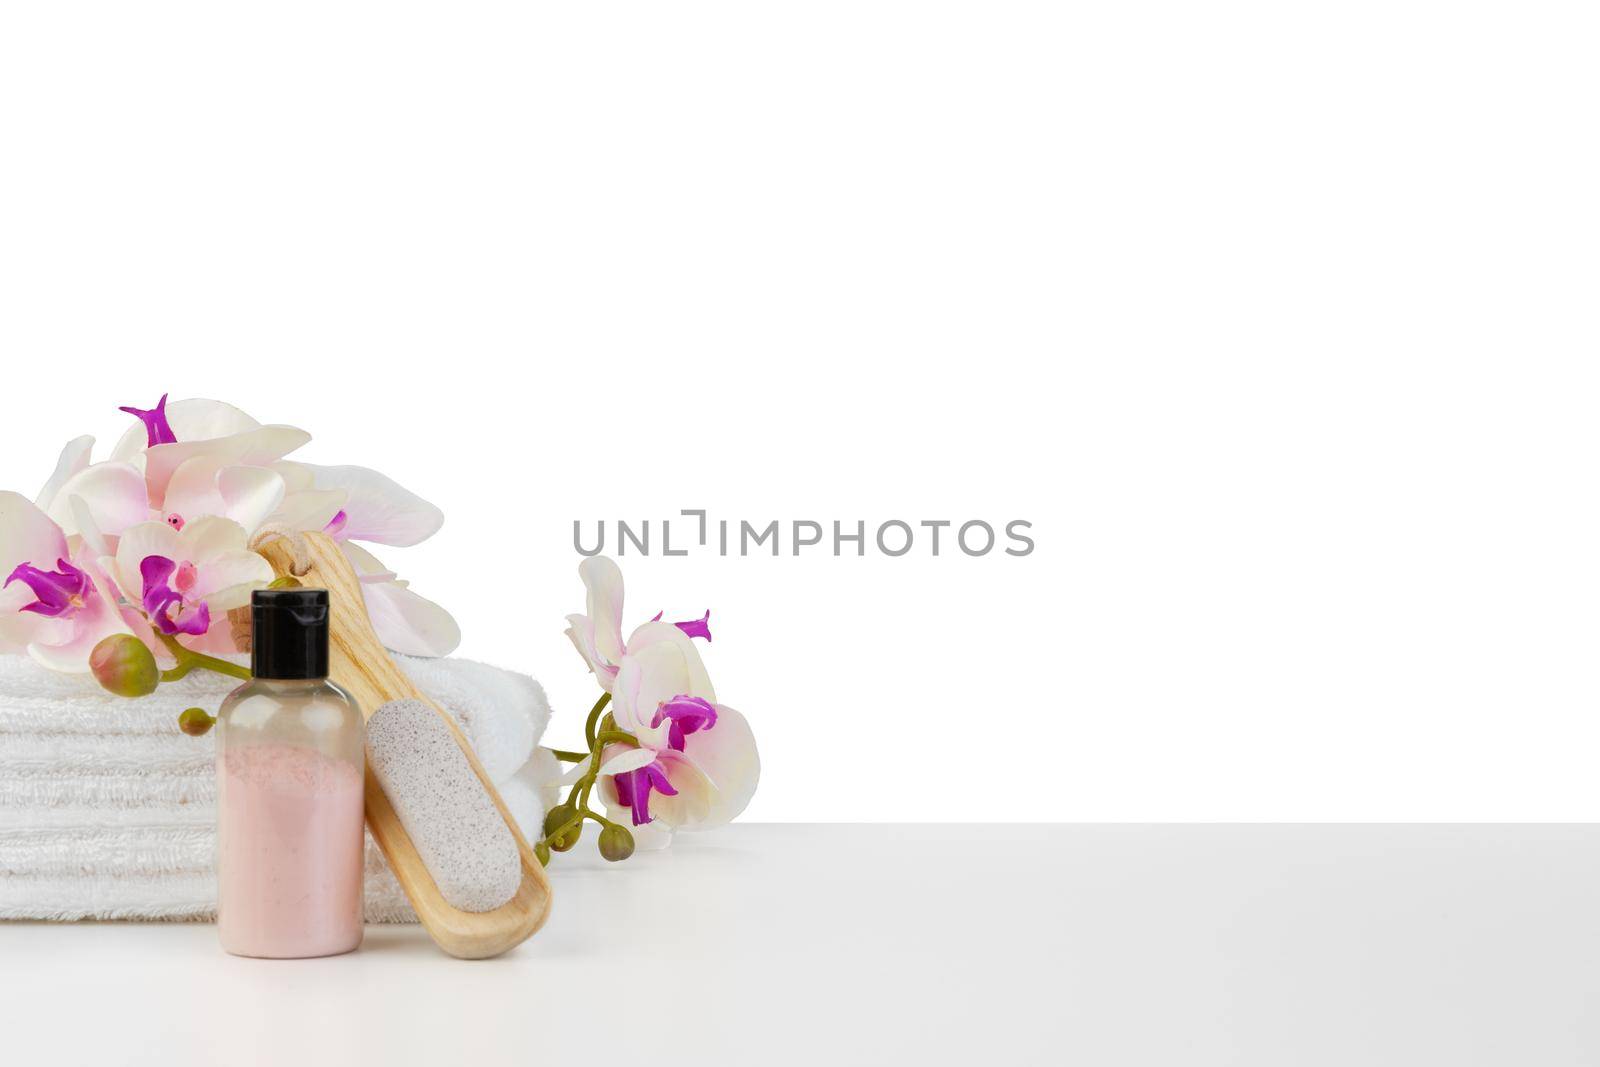 Spa composition with towels and flowers isolated on white by Fabrikasimf